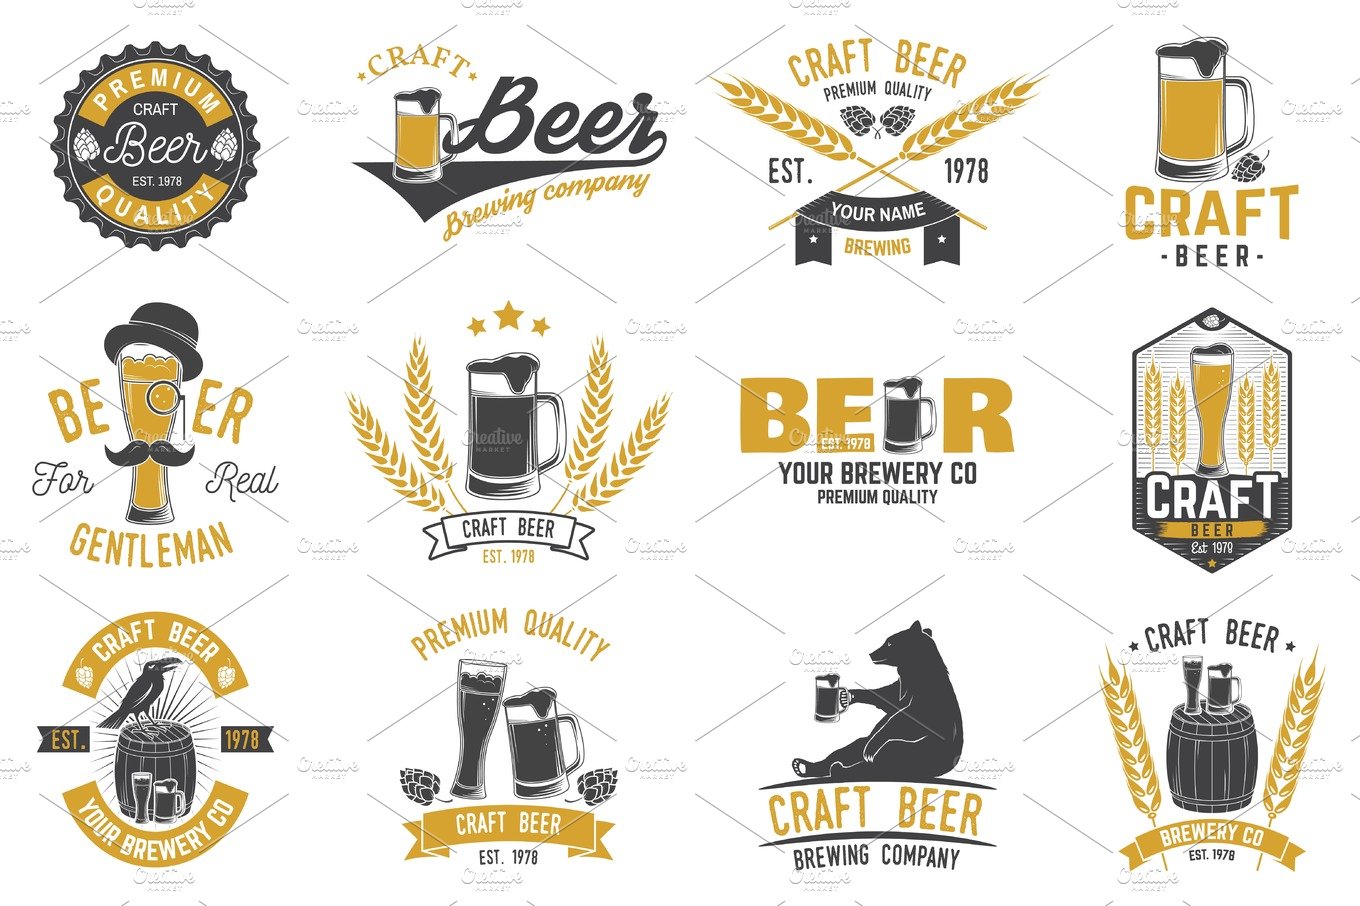 Craft Beer Badges/Logos/Overlays cover image.